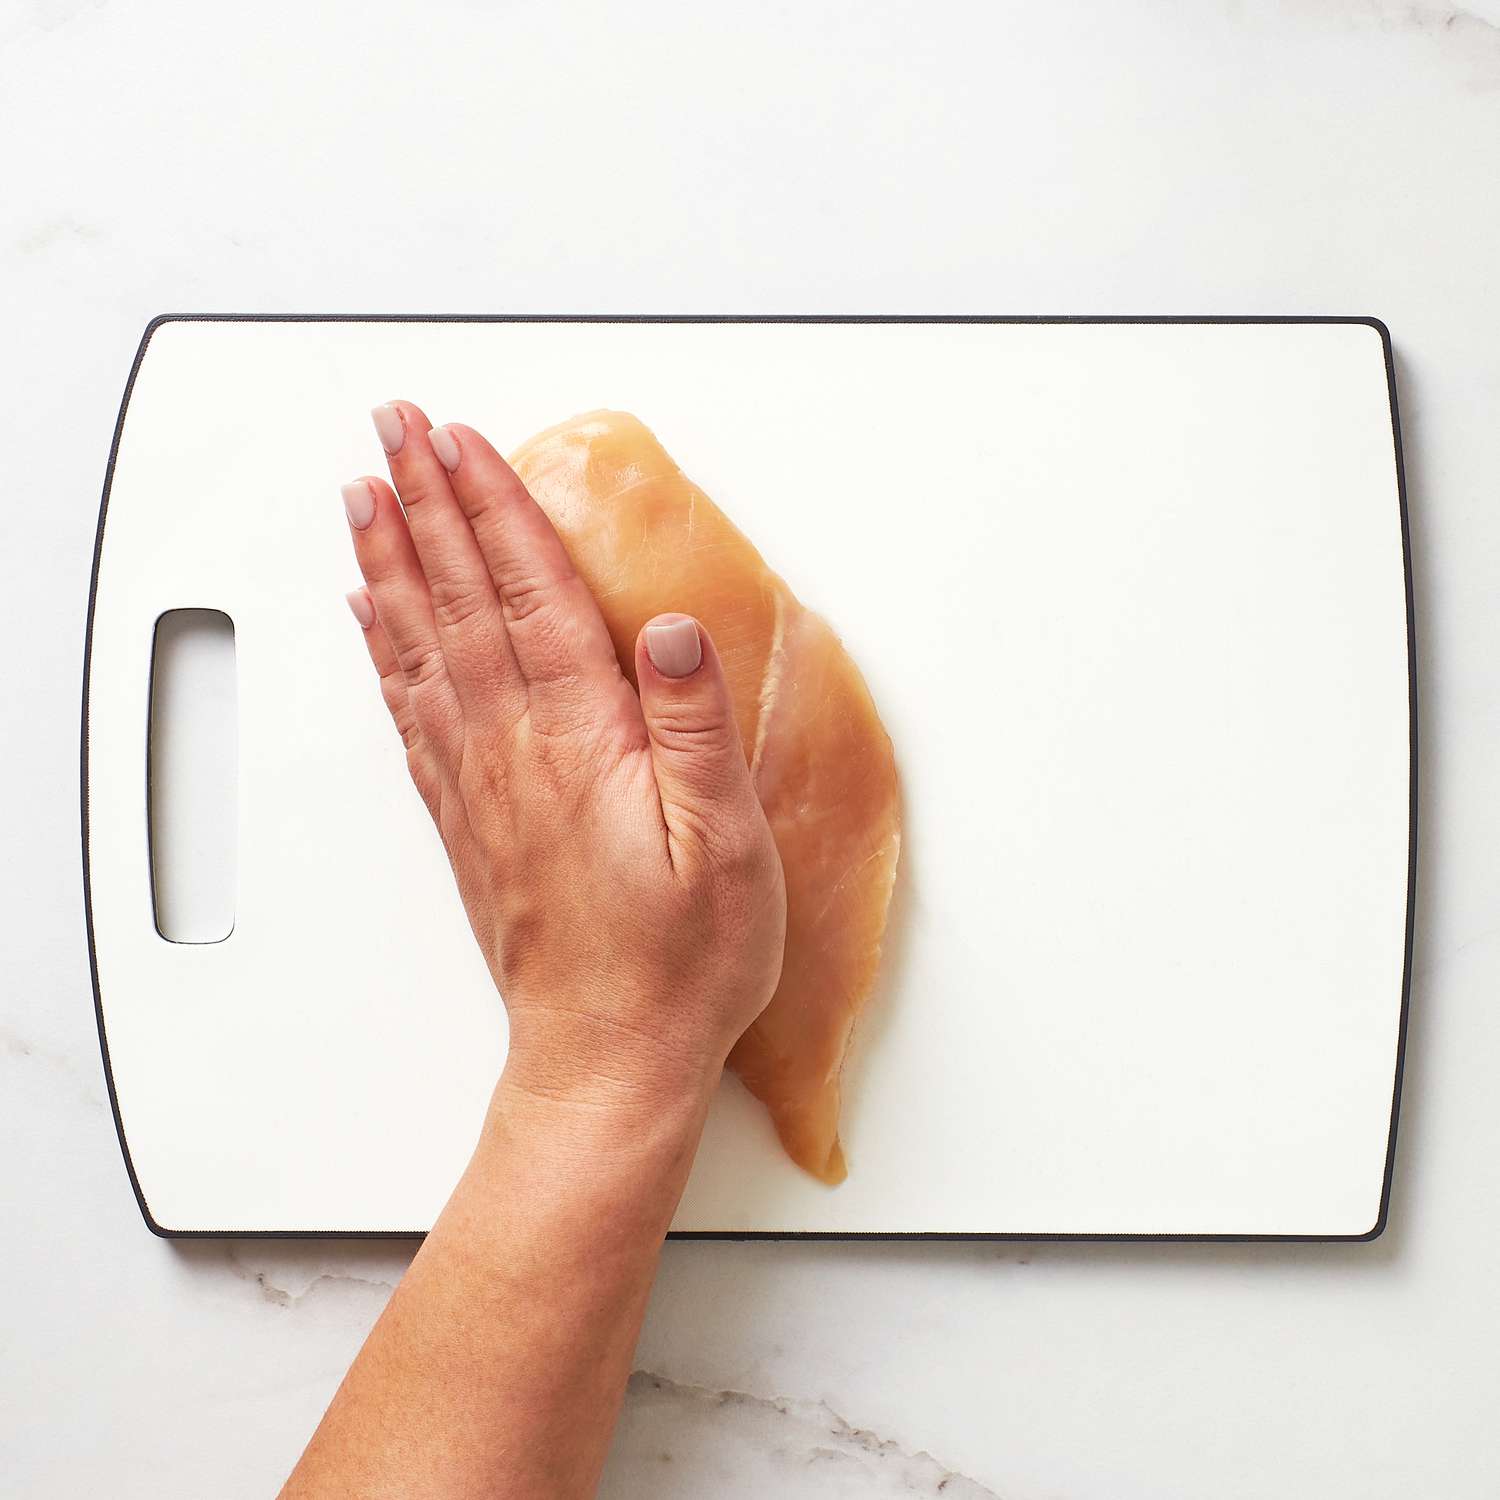 A hand placed on a chicken breast on a cutting board